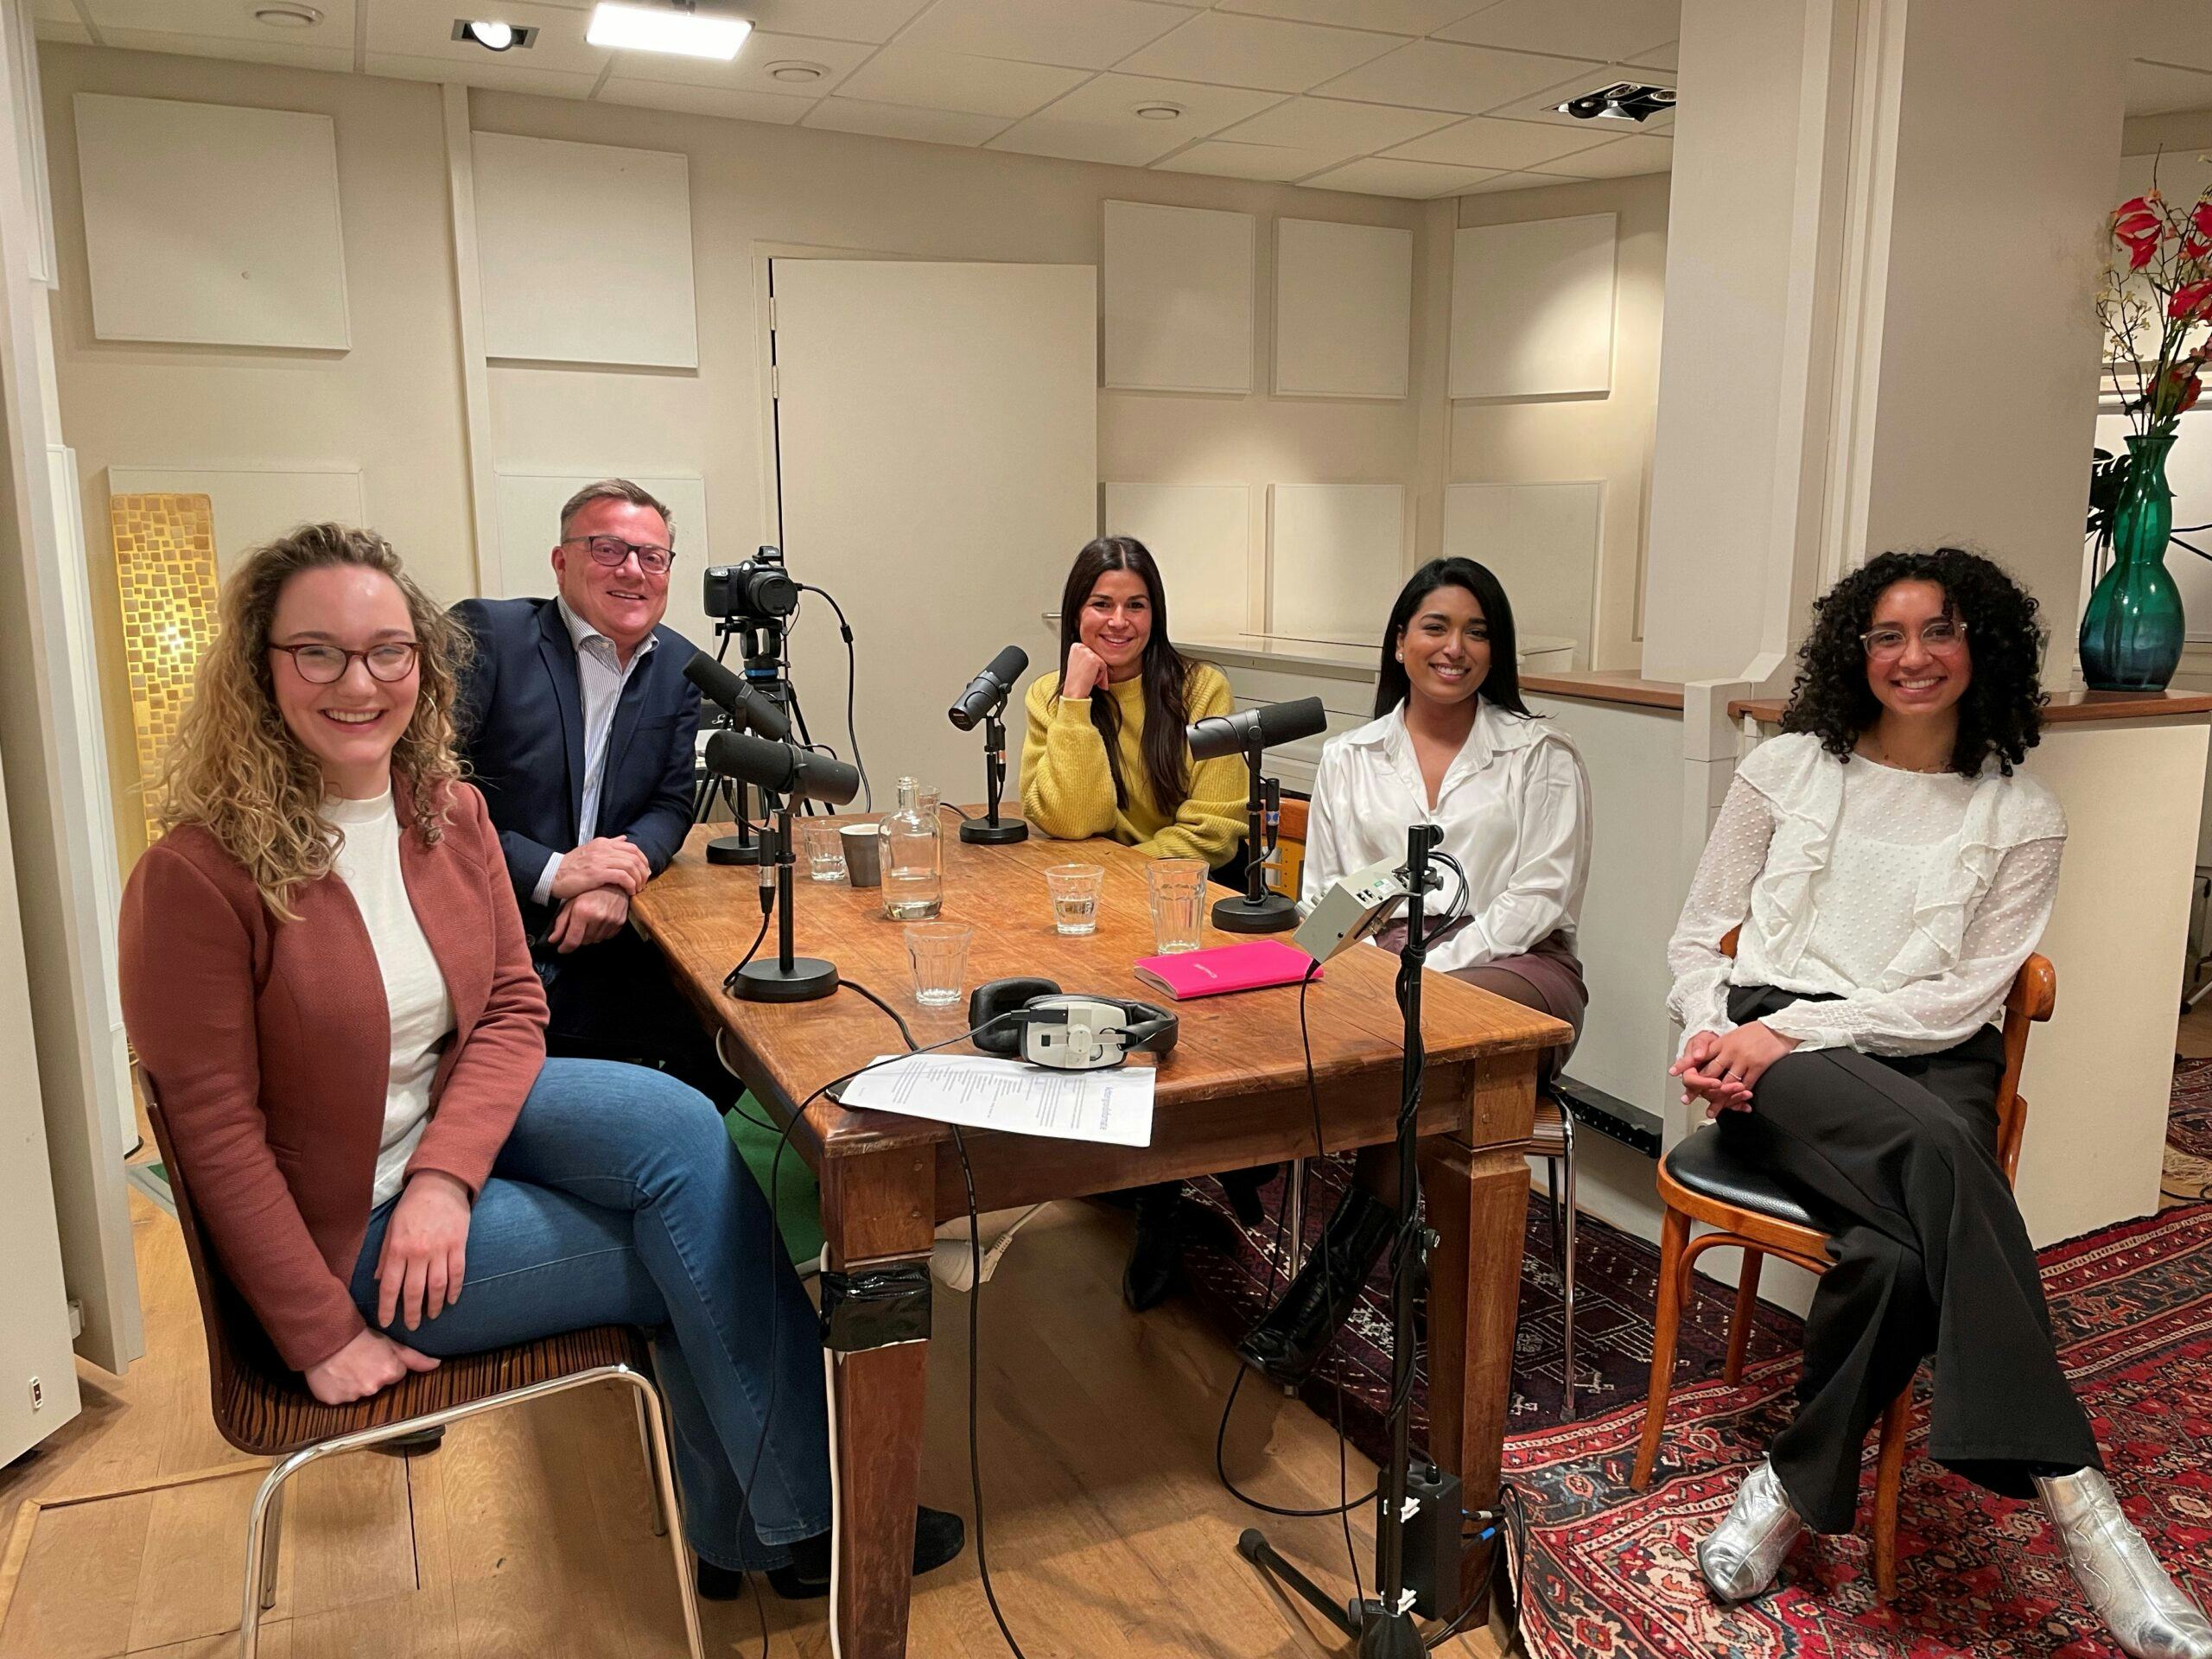 AMpodcast I AM Young InSurance -  Ontwikkeling van de young professional